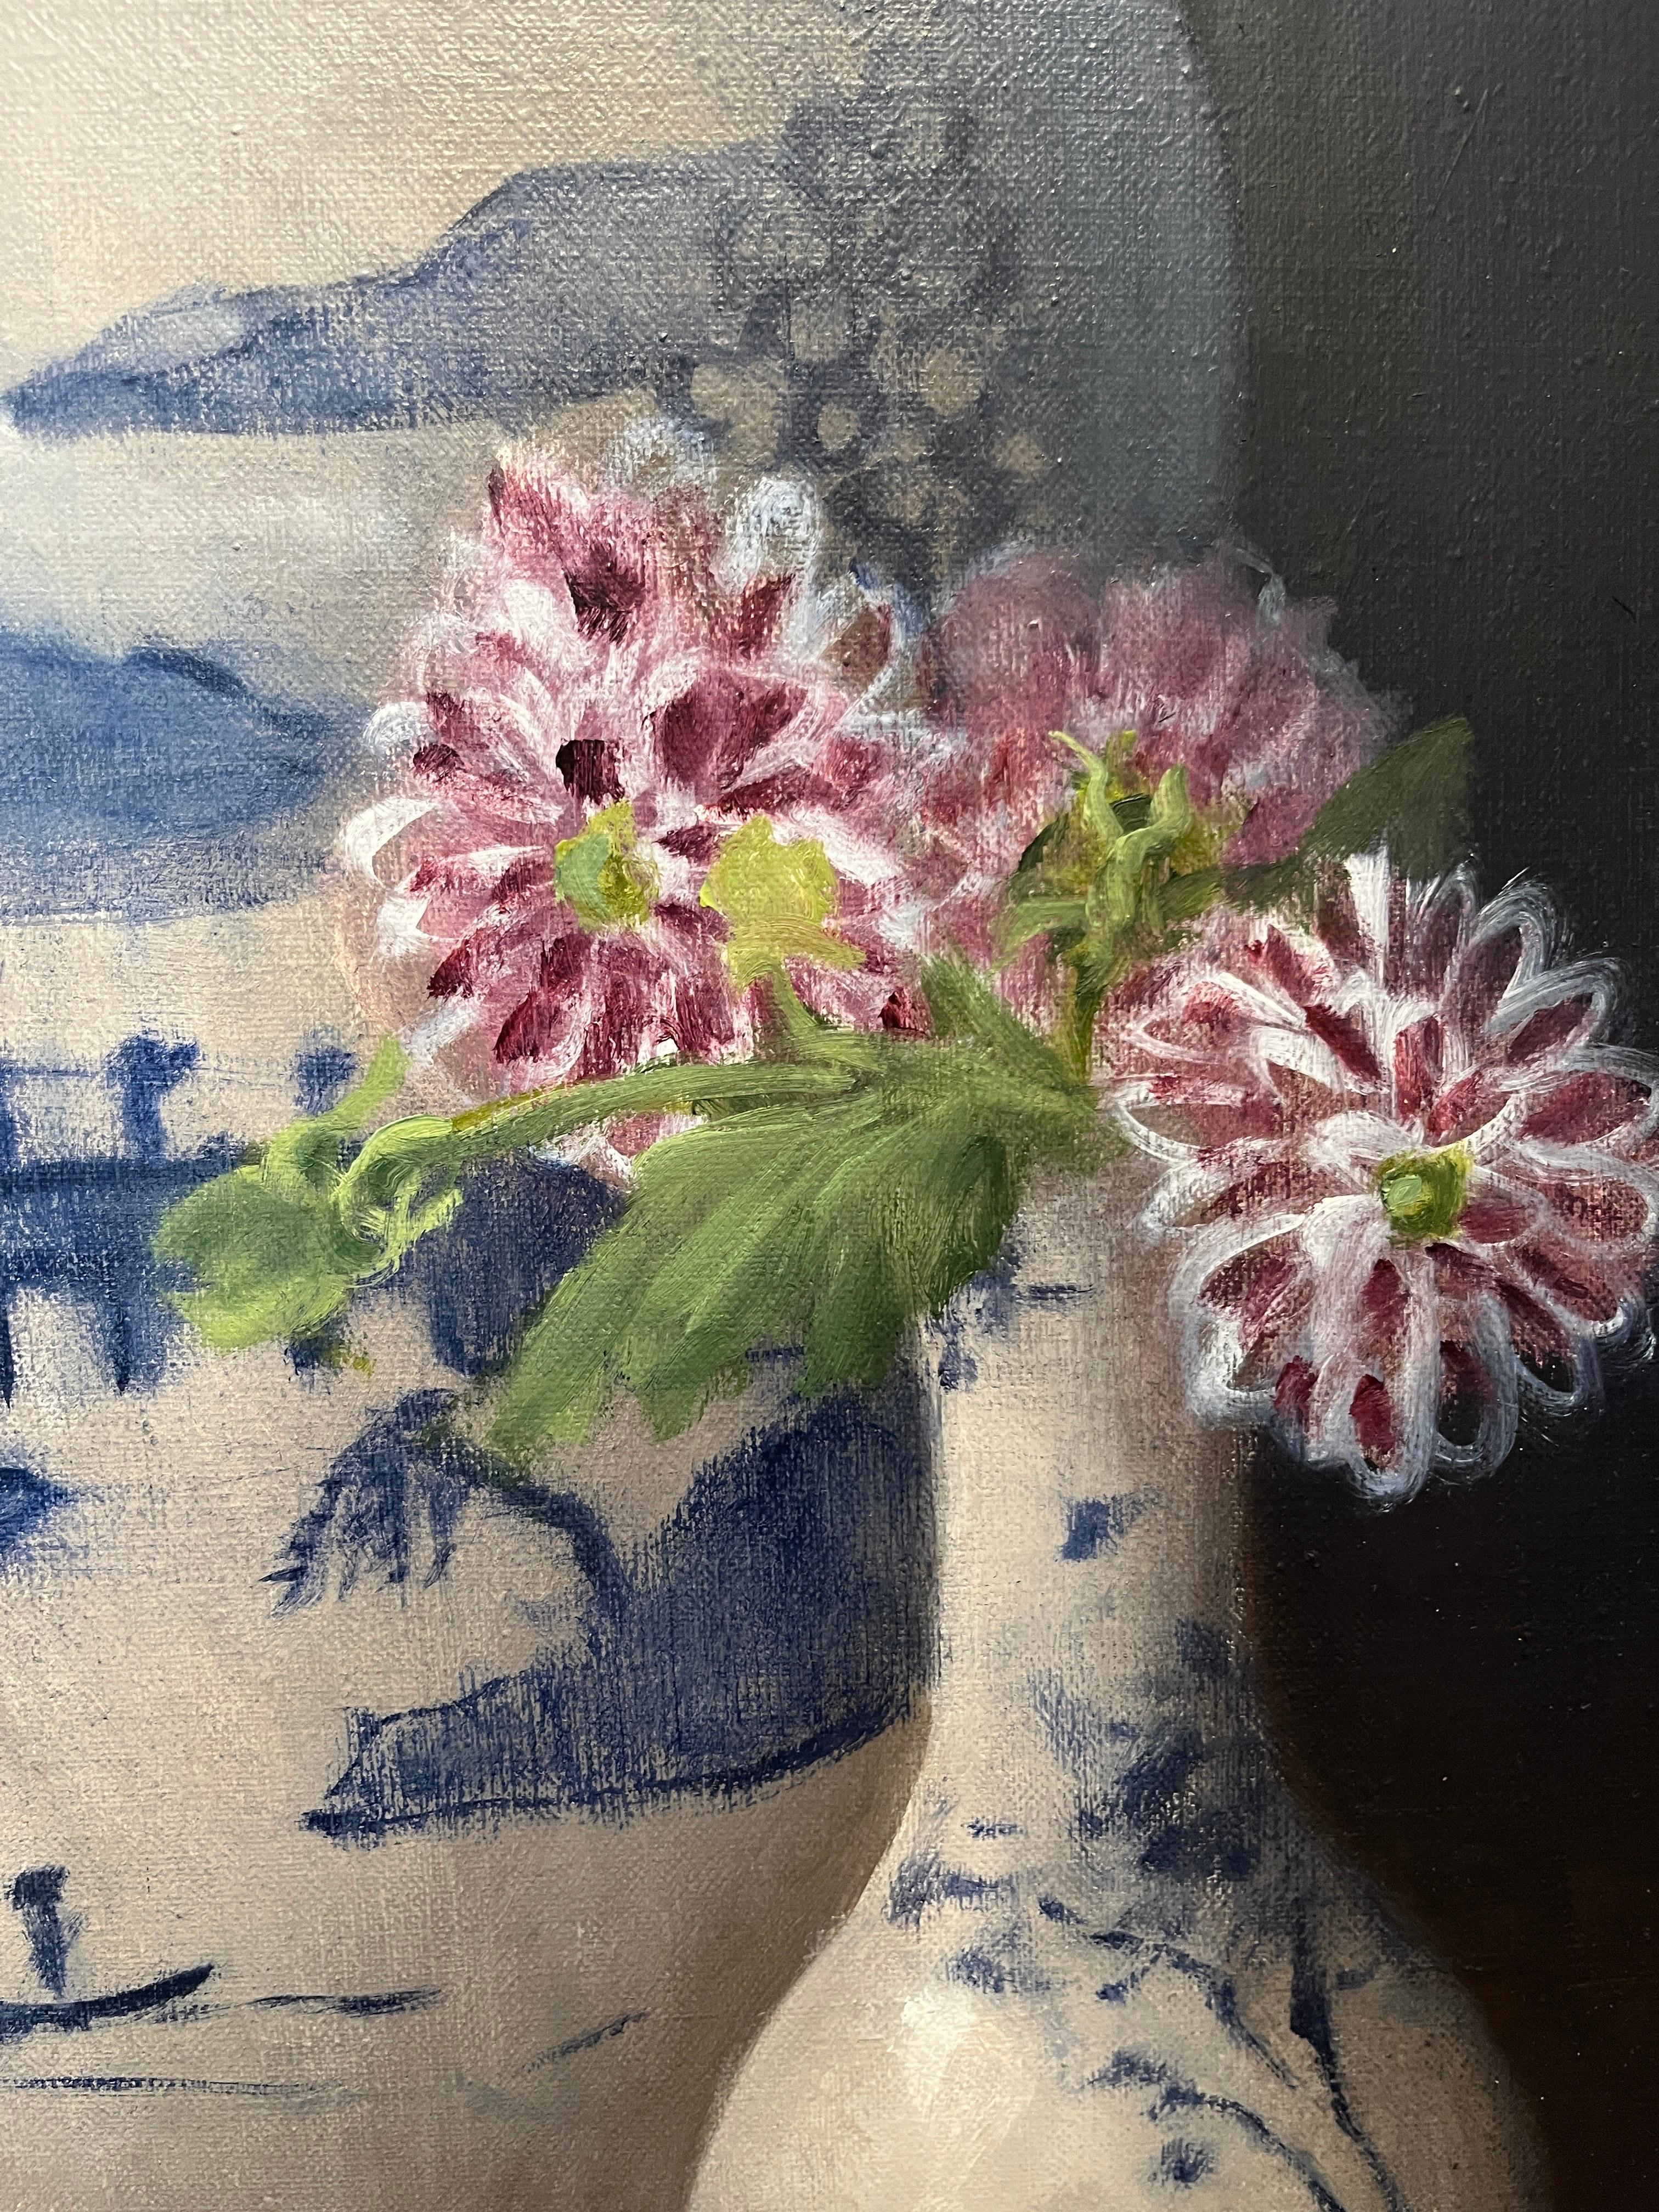 This piece is an original oil painting on linen canvas. It features blue and white porcelain vases and deep purple dahlias. Its overall framed dimensions are approximately 40x45 inches.  It is a beautiful, moody piece, full of the mystery its title